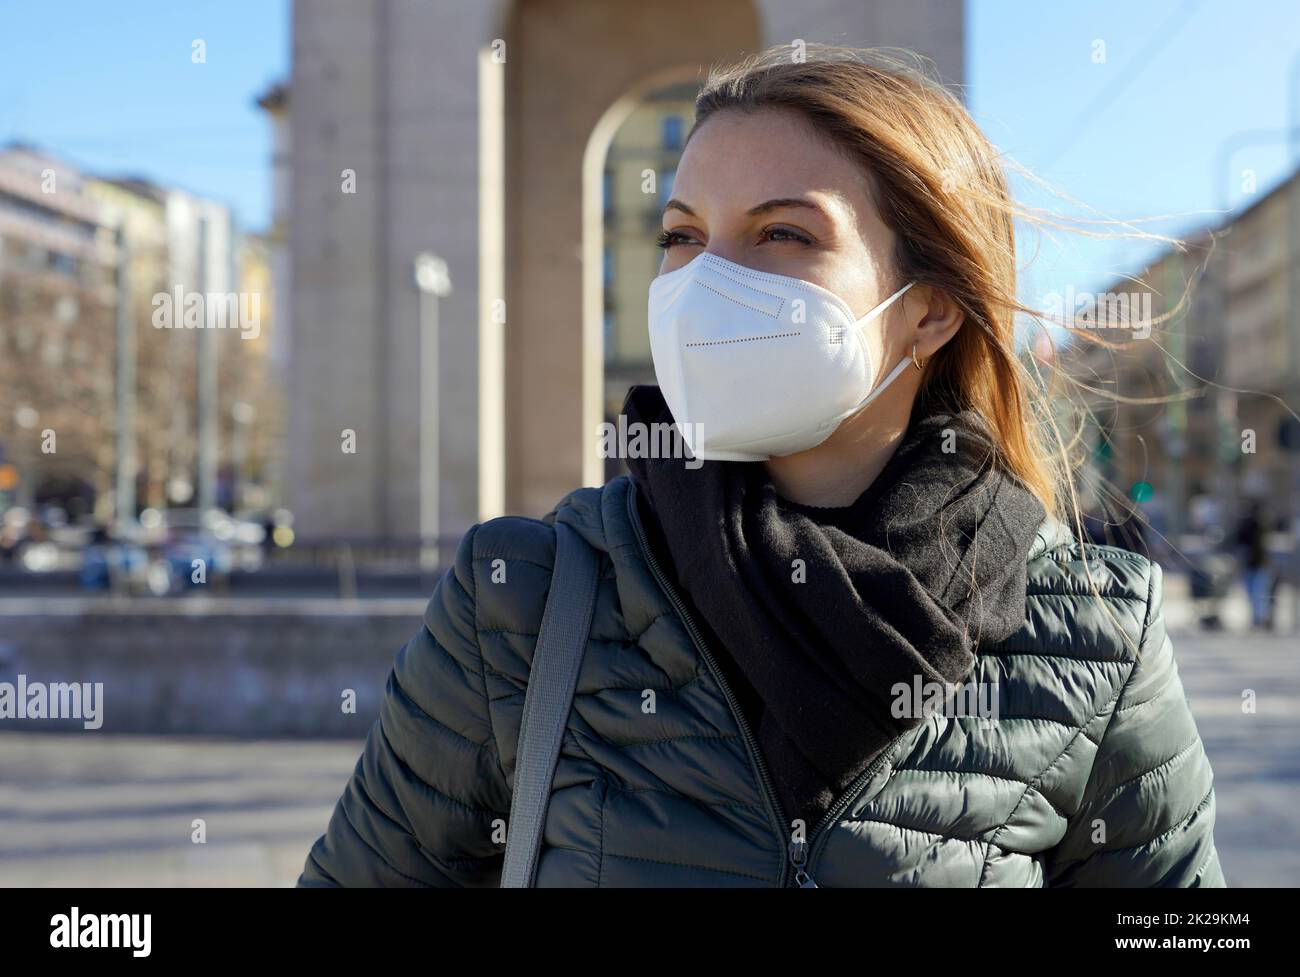 Beautiful woman in city street wearing KN95 FFP2 mask protective against respiratory disease looking to the side Stock Photo